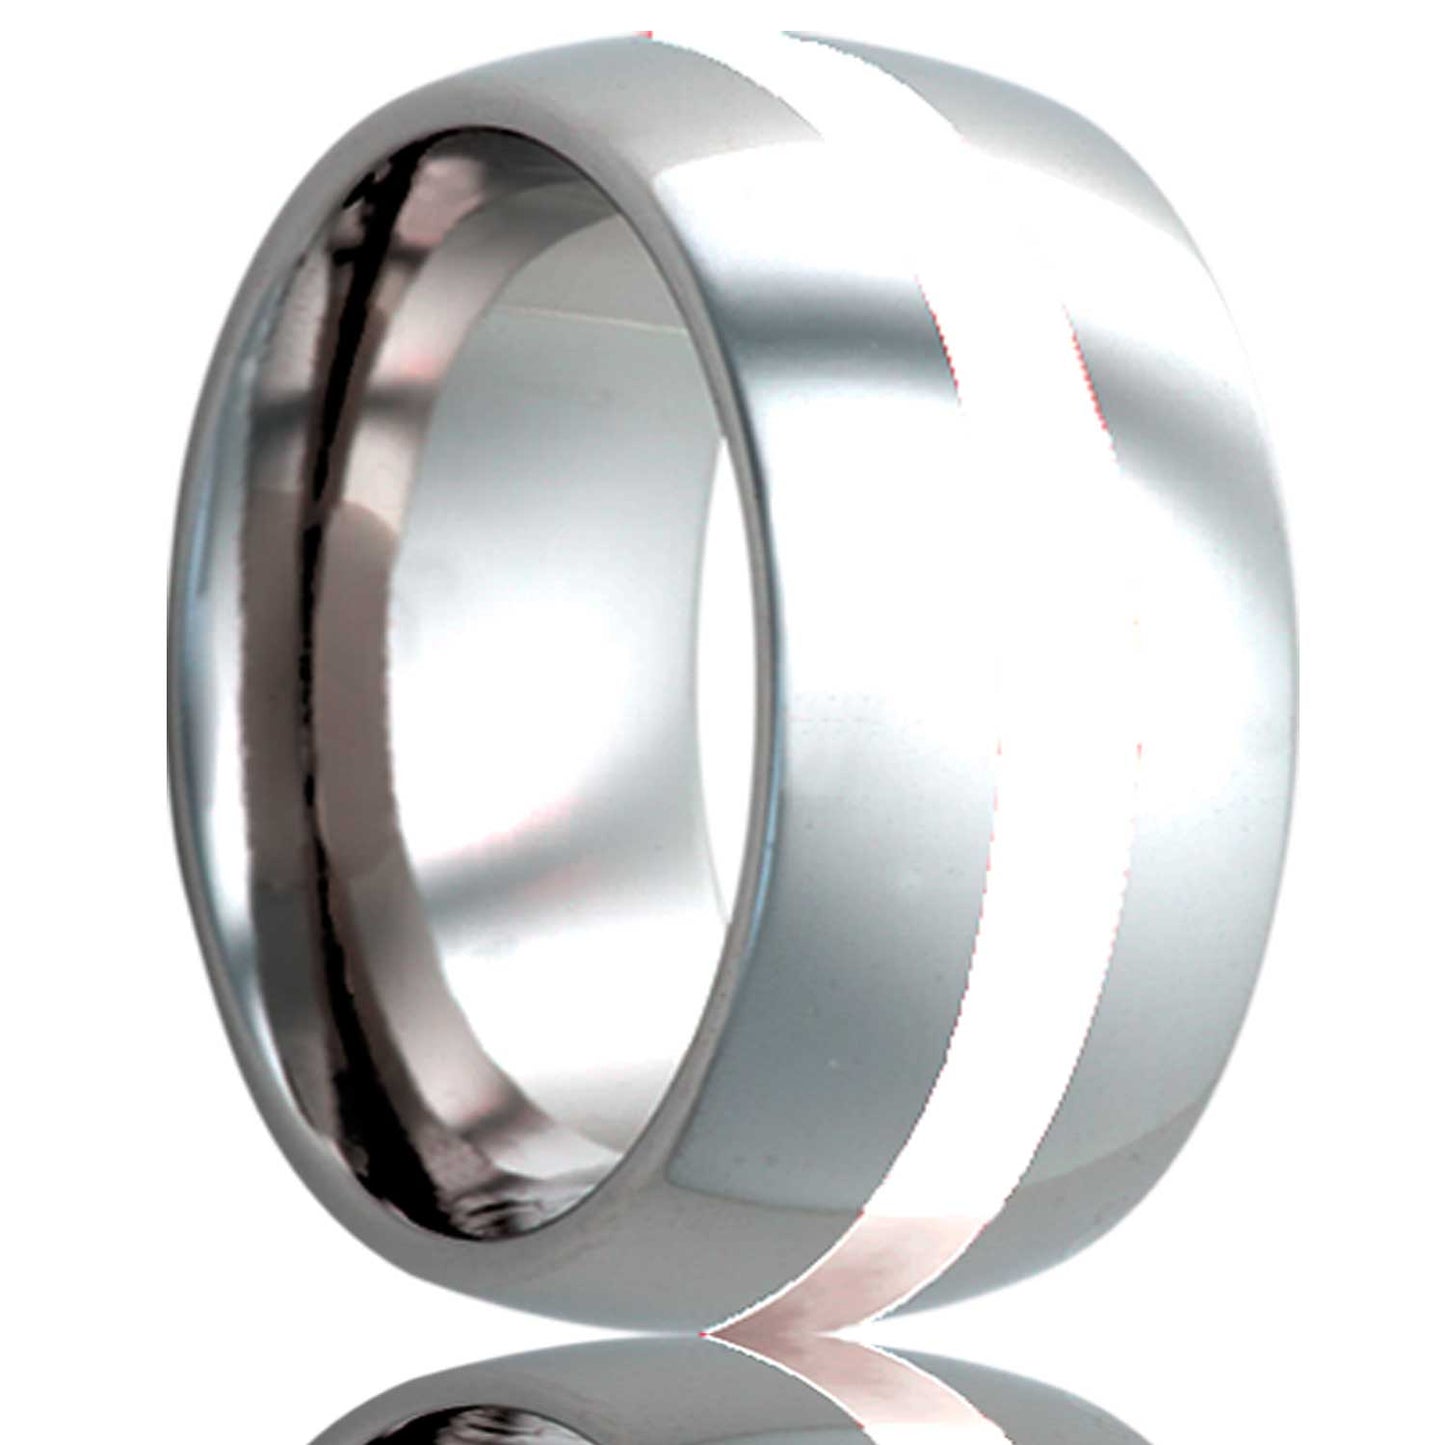 A argentium silver inlay domed tungsten wedding band displayed on a neutral white background.